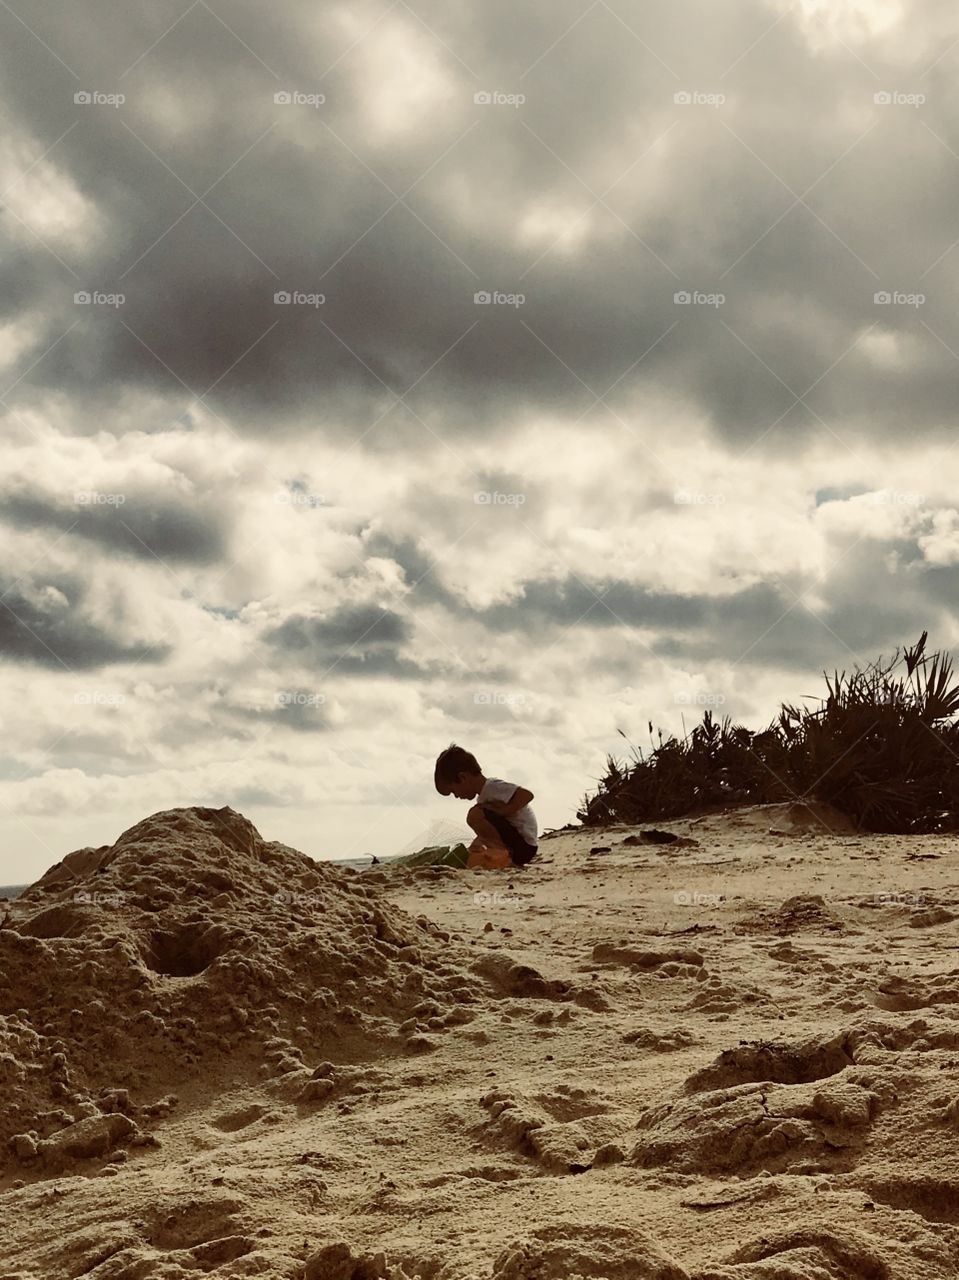 Boy playing in the sand next to the ocean waves